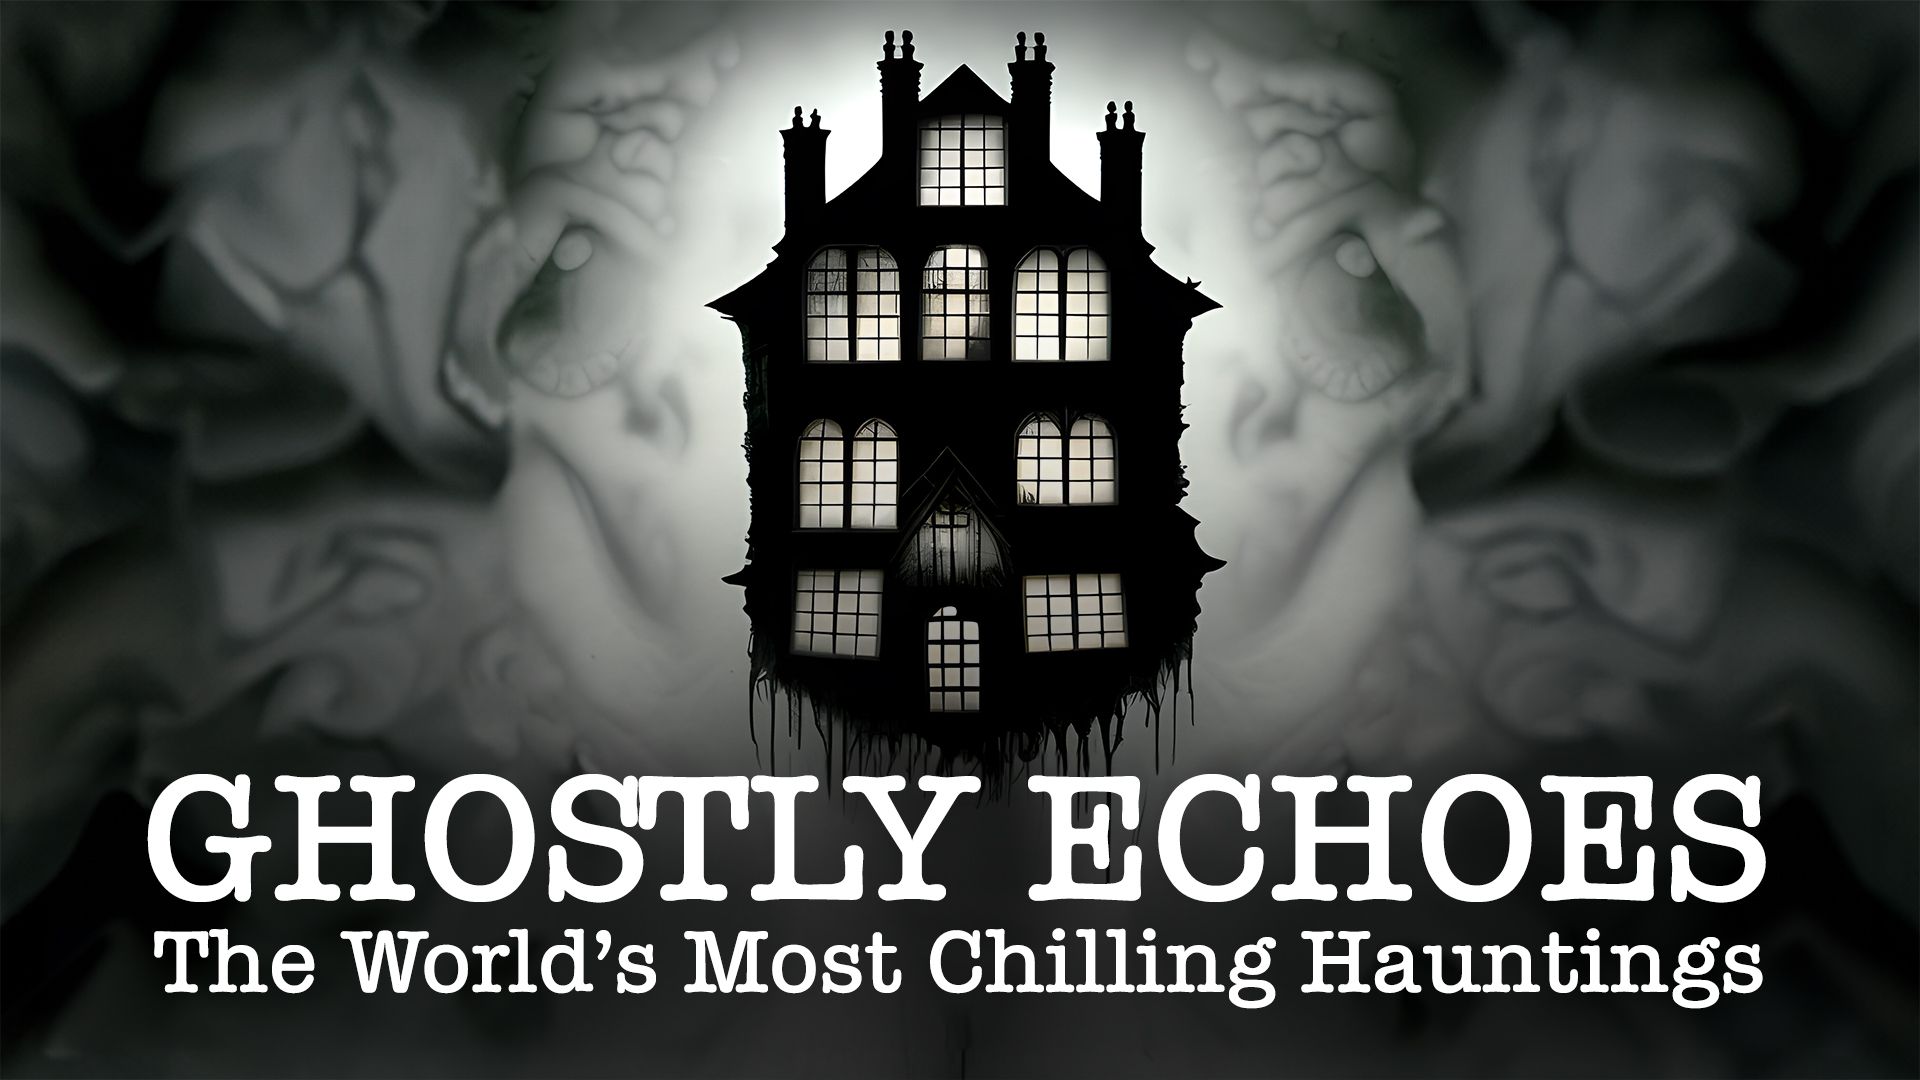 Ghostly Echoes: The World's Most Chilling Hauntings